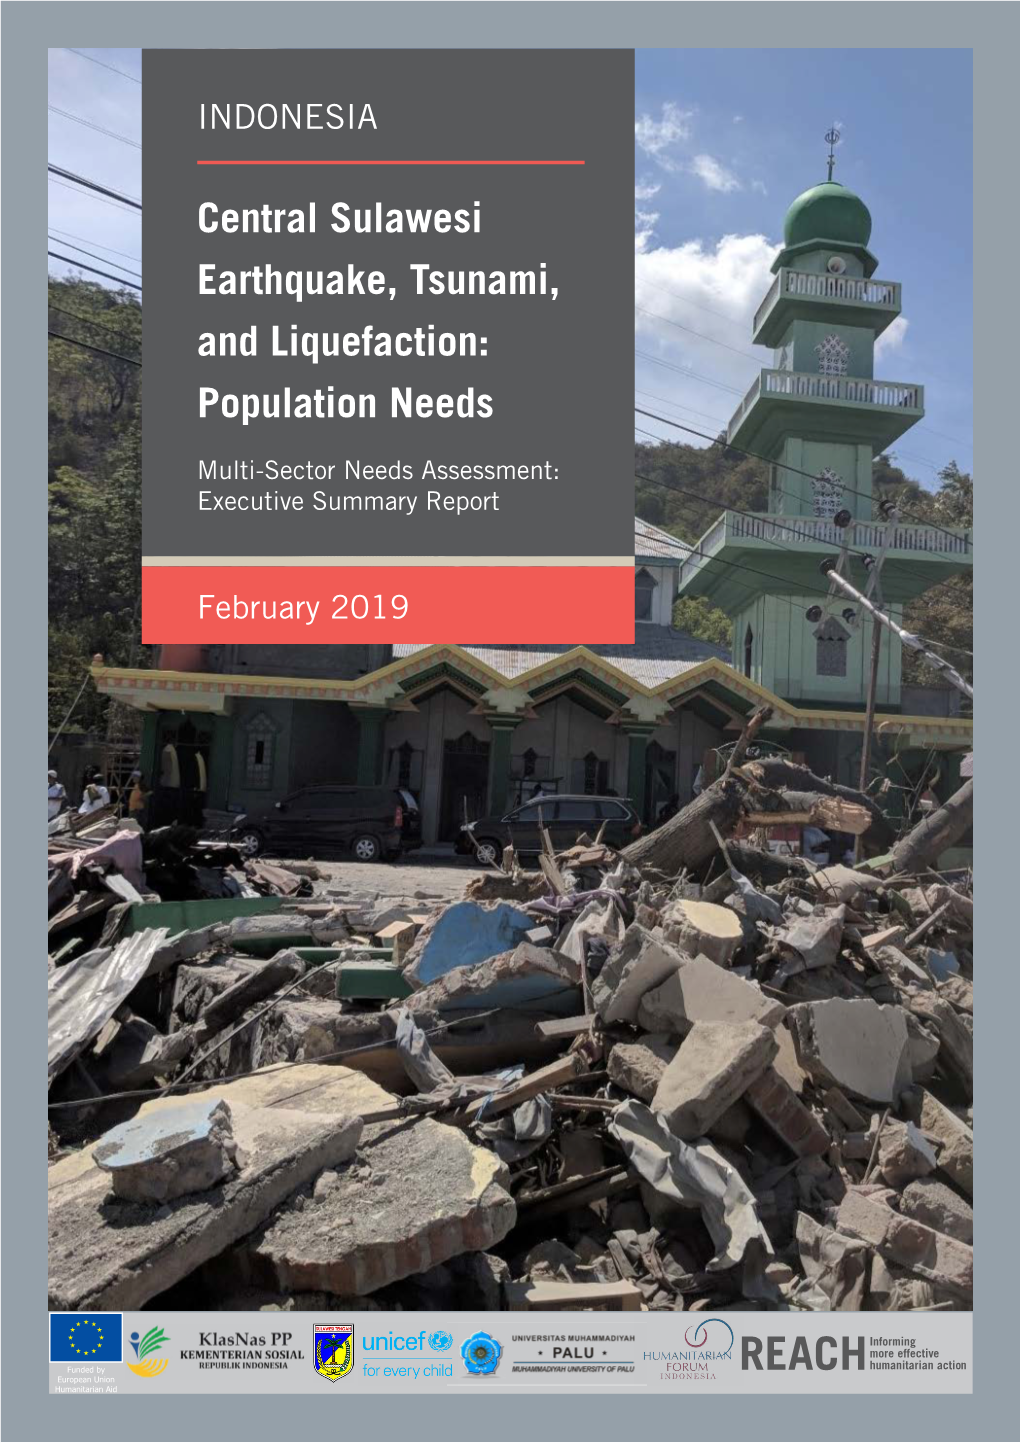 Central Sulawesi Earthquake, Tsunami, and Liquefaction: Population Needs